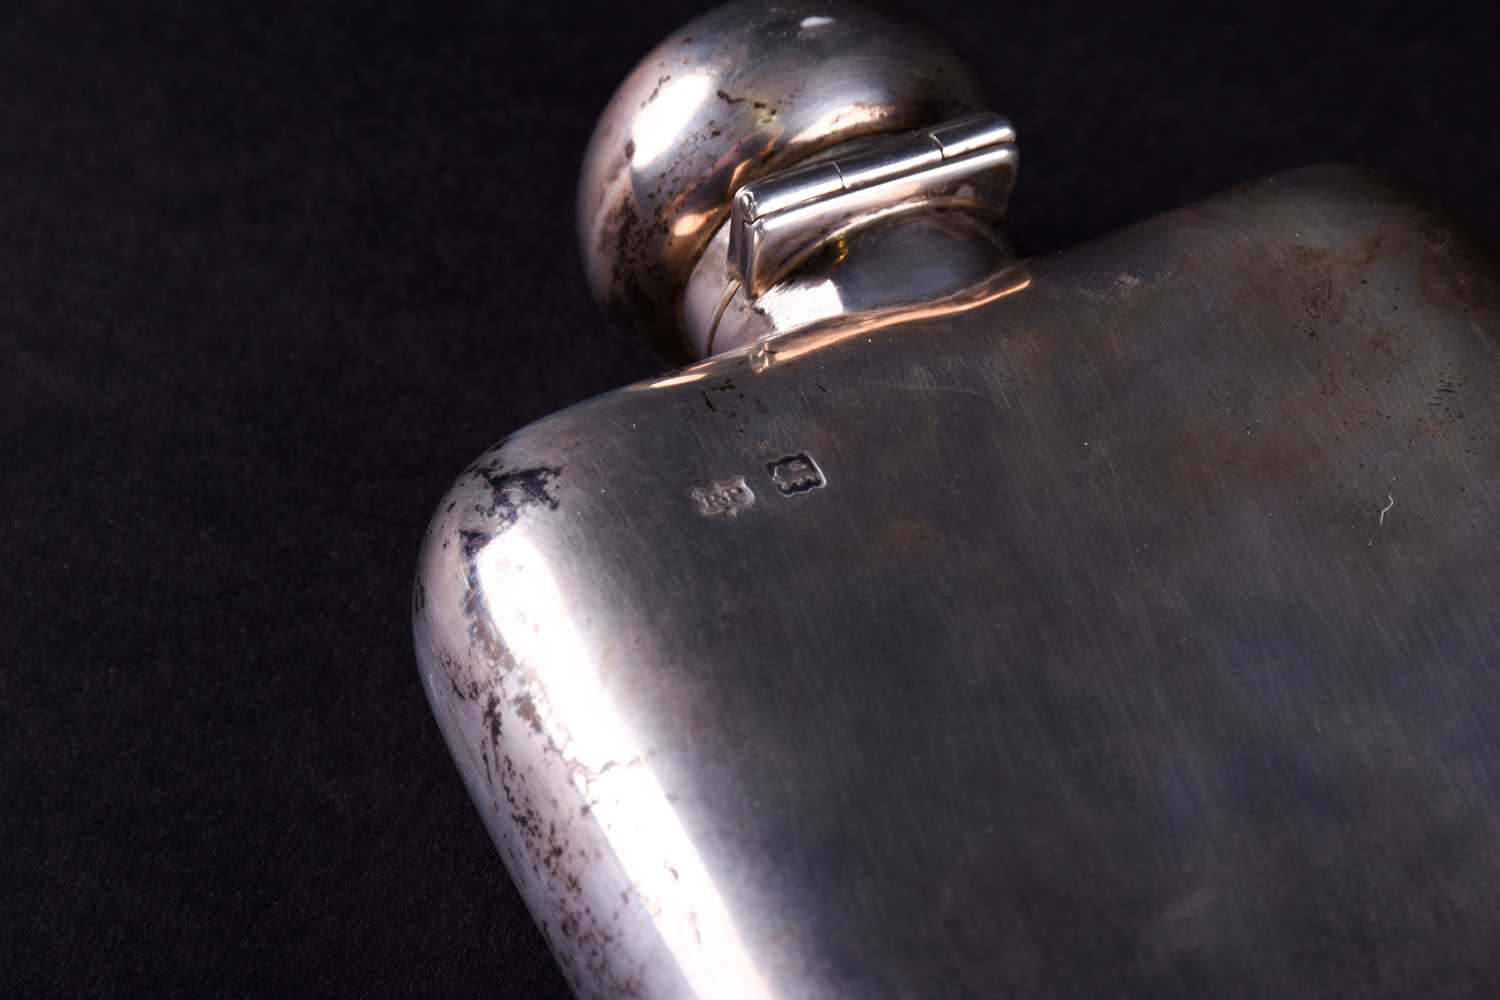 An Edwardian silver hip flask, Robert Pringle & Sons, London 1902, engraved with monogram IEH, 170g, - Image 4 of 6